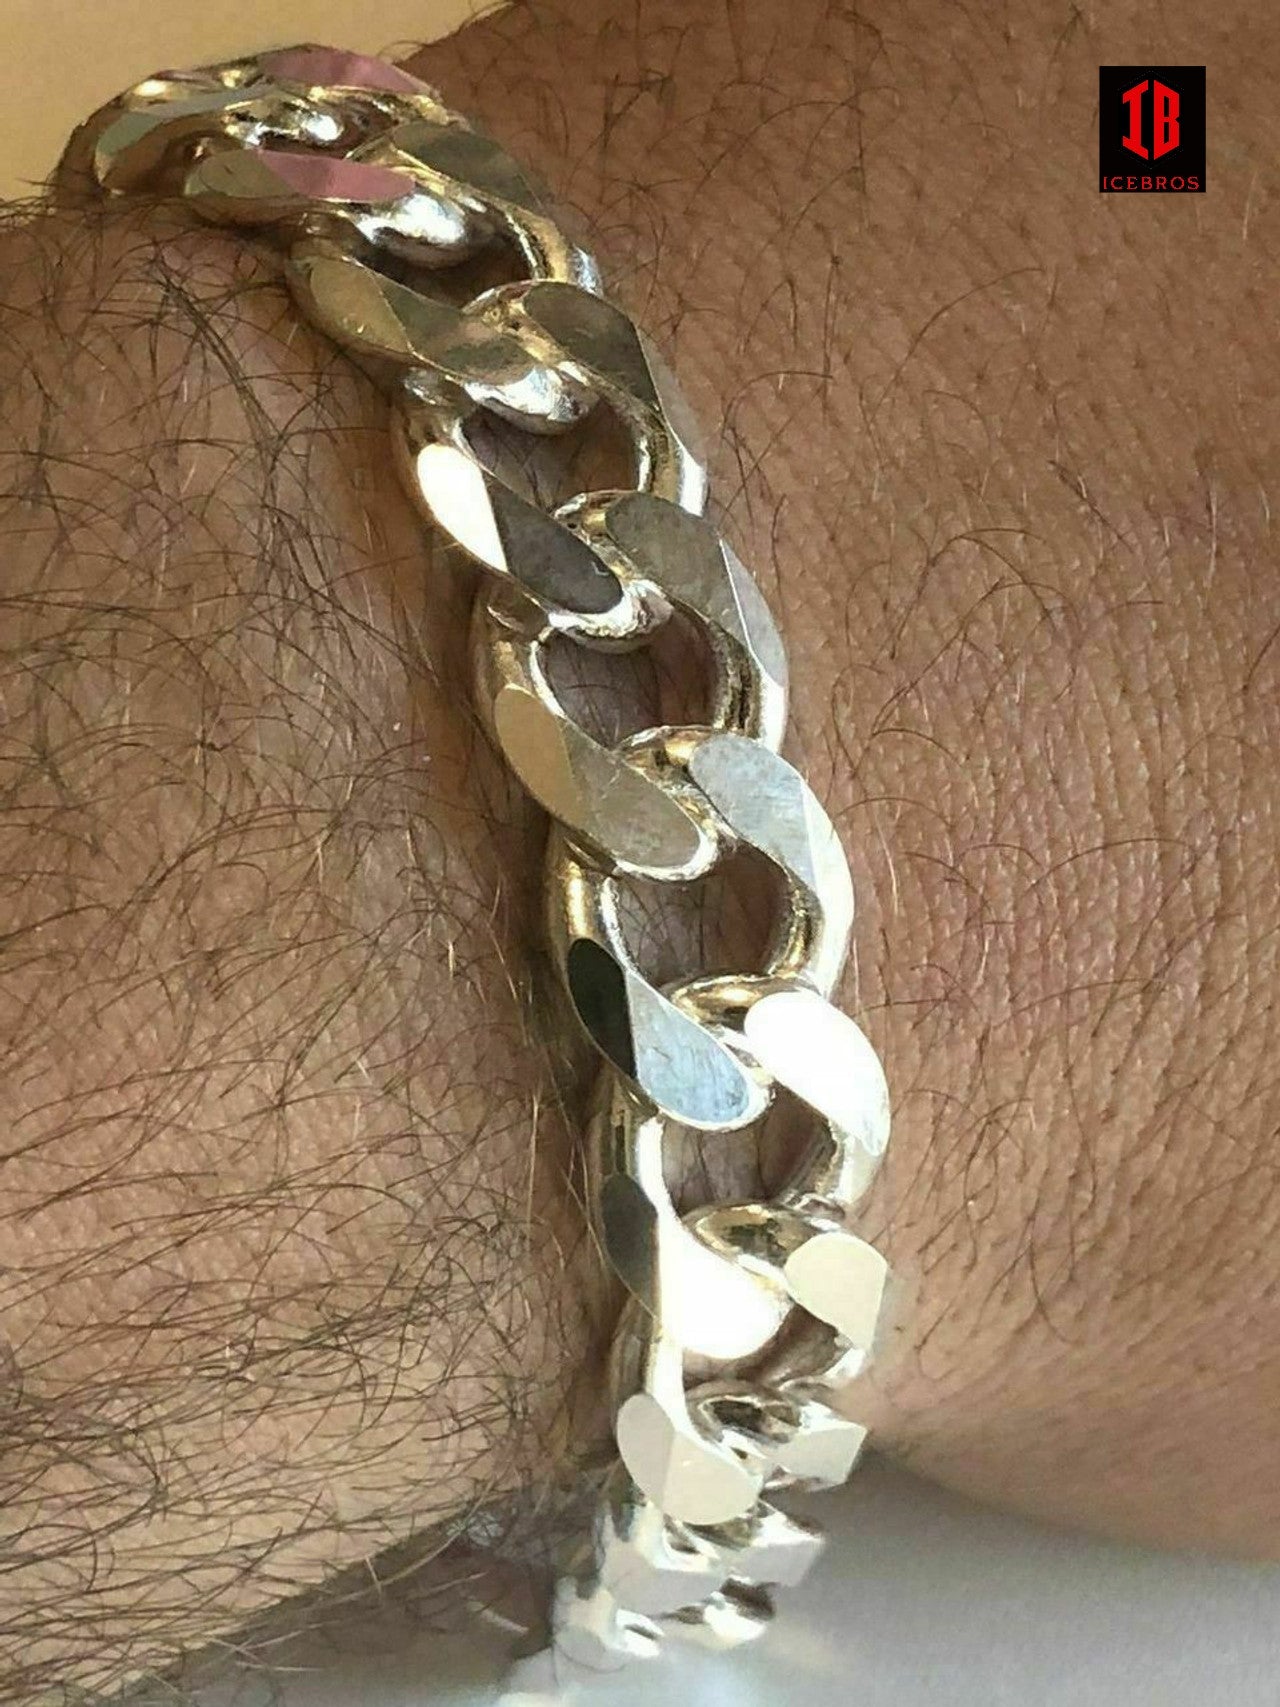 White Gold Vermeil Over 925 Sterling Silver Miami Cuban Curb Link Bracelet Made In Italy